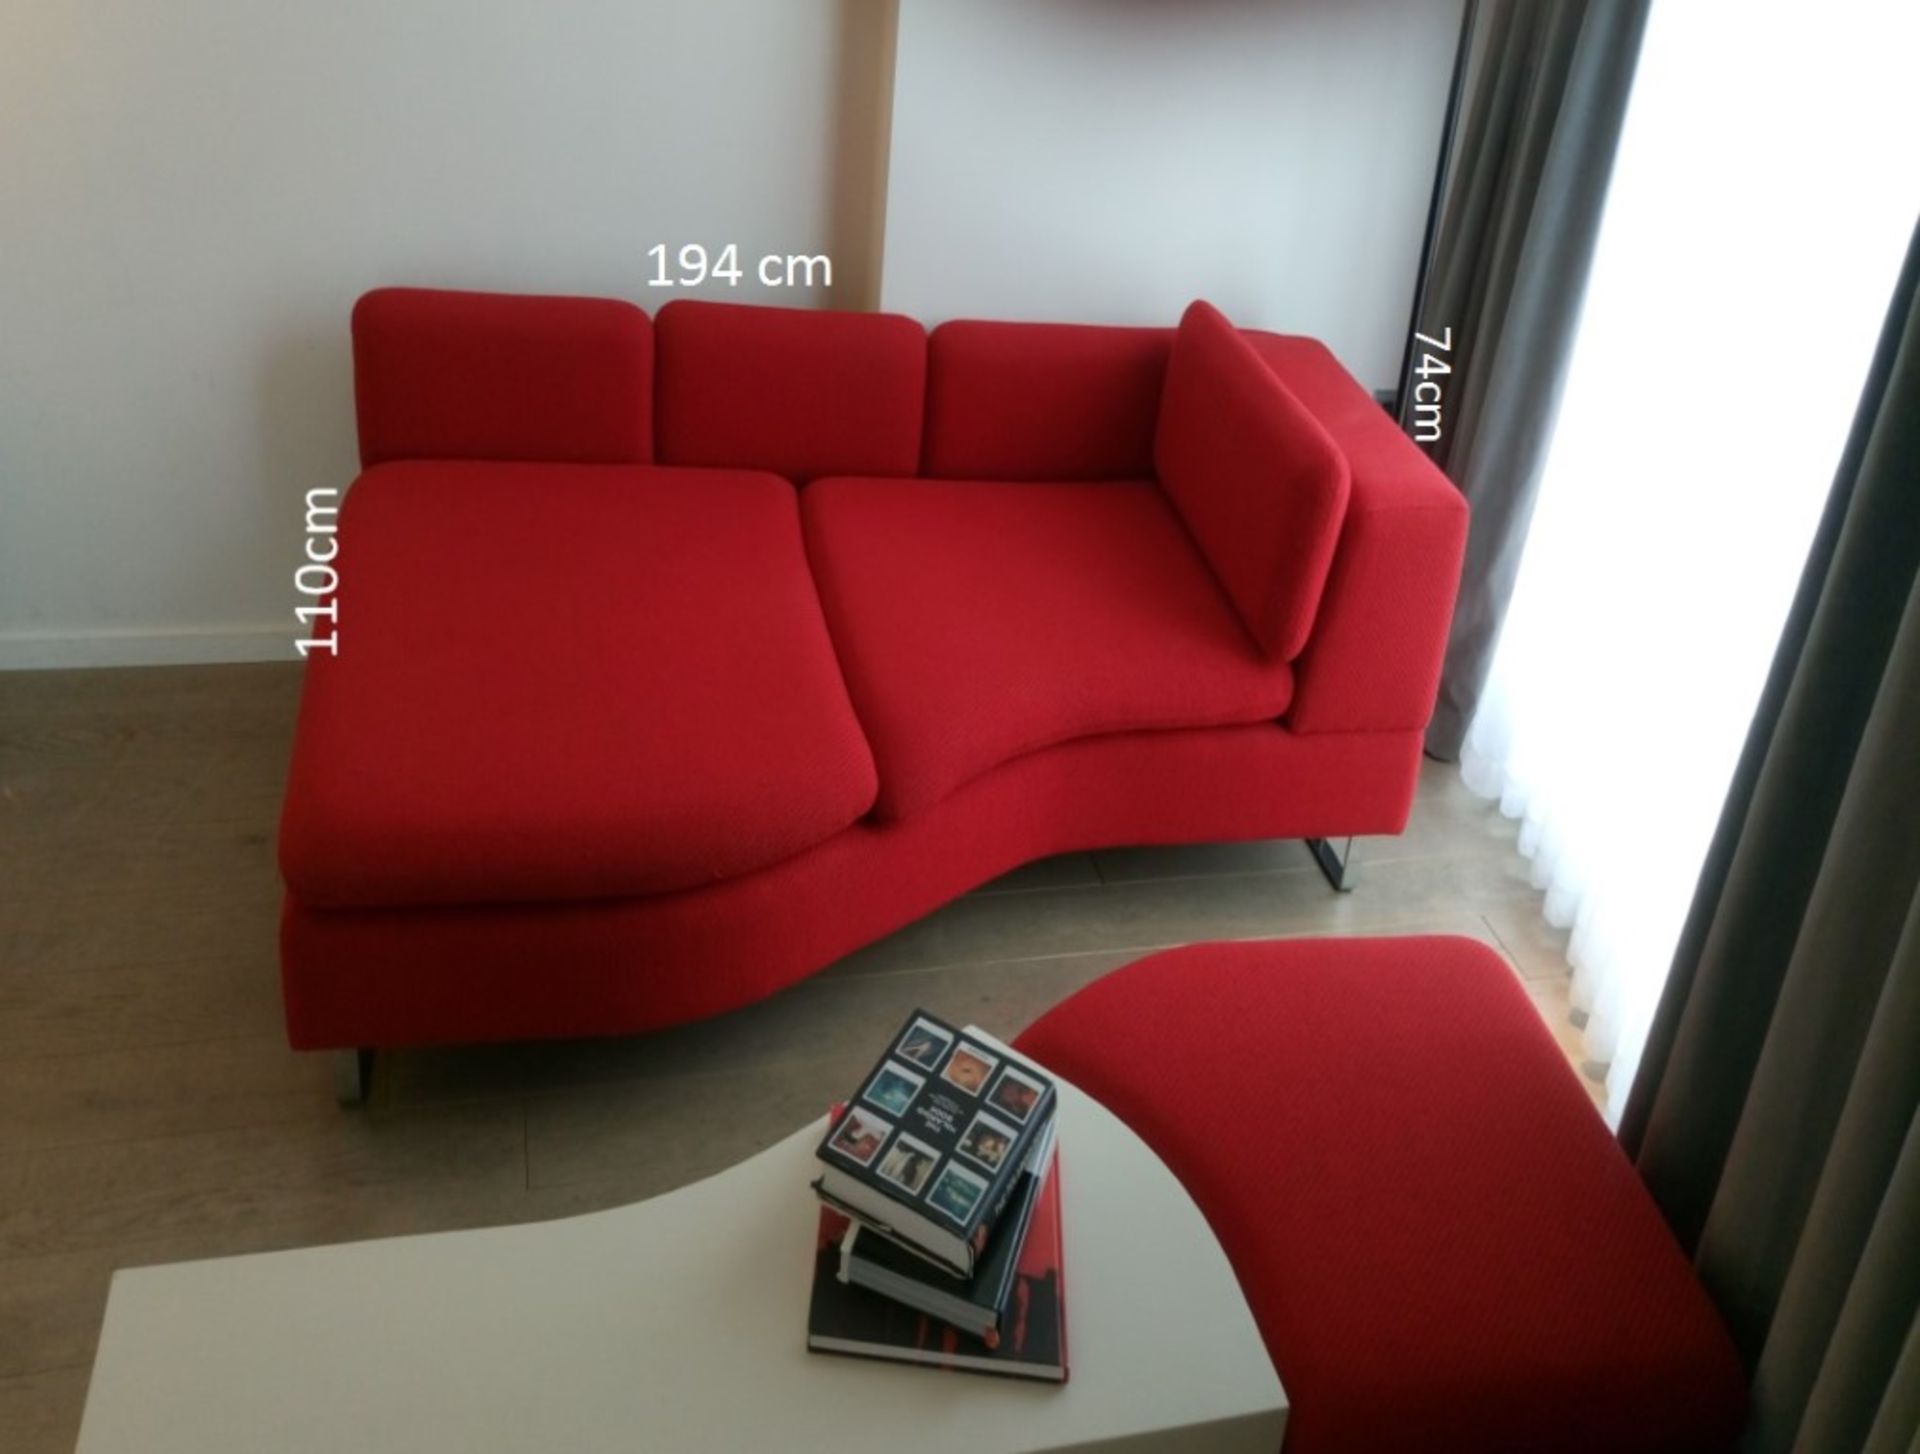 1 x Bespoke Curved Sofa and Pouffe - Colour: Bright Red - Recently Removed From A City Centre - Image 2 of 2